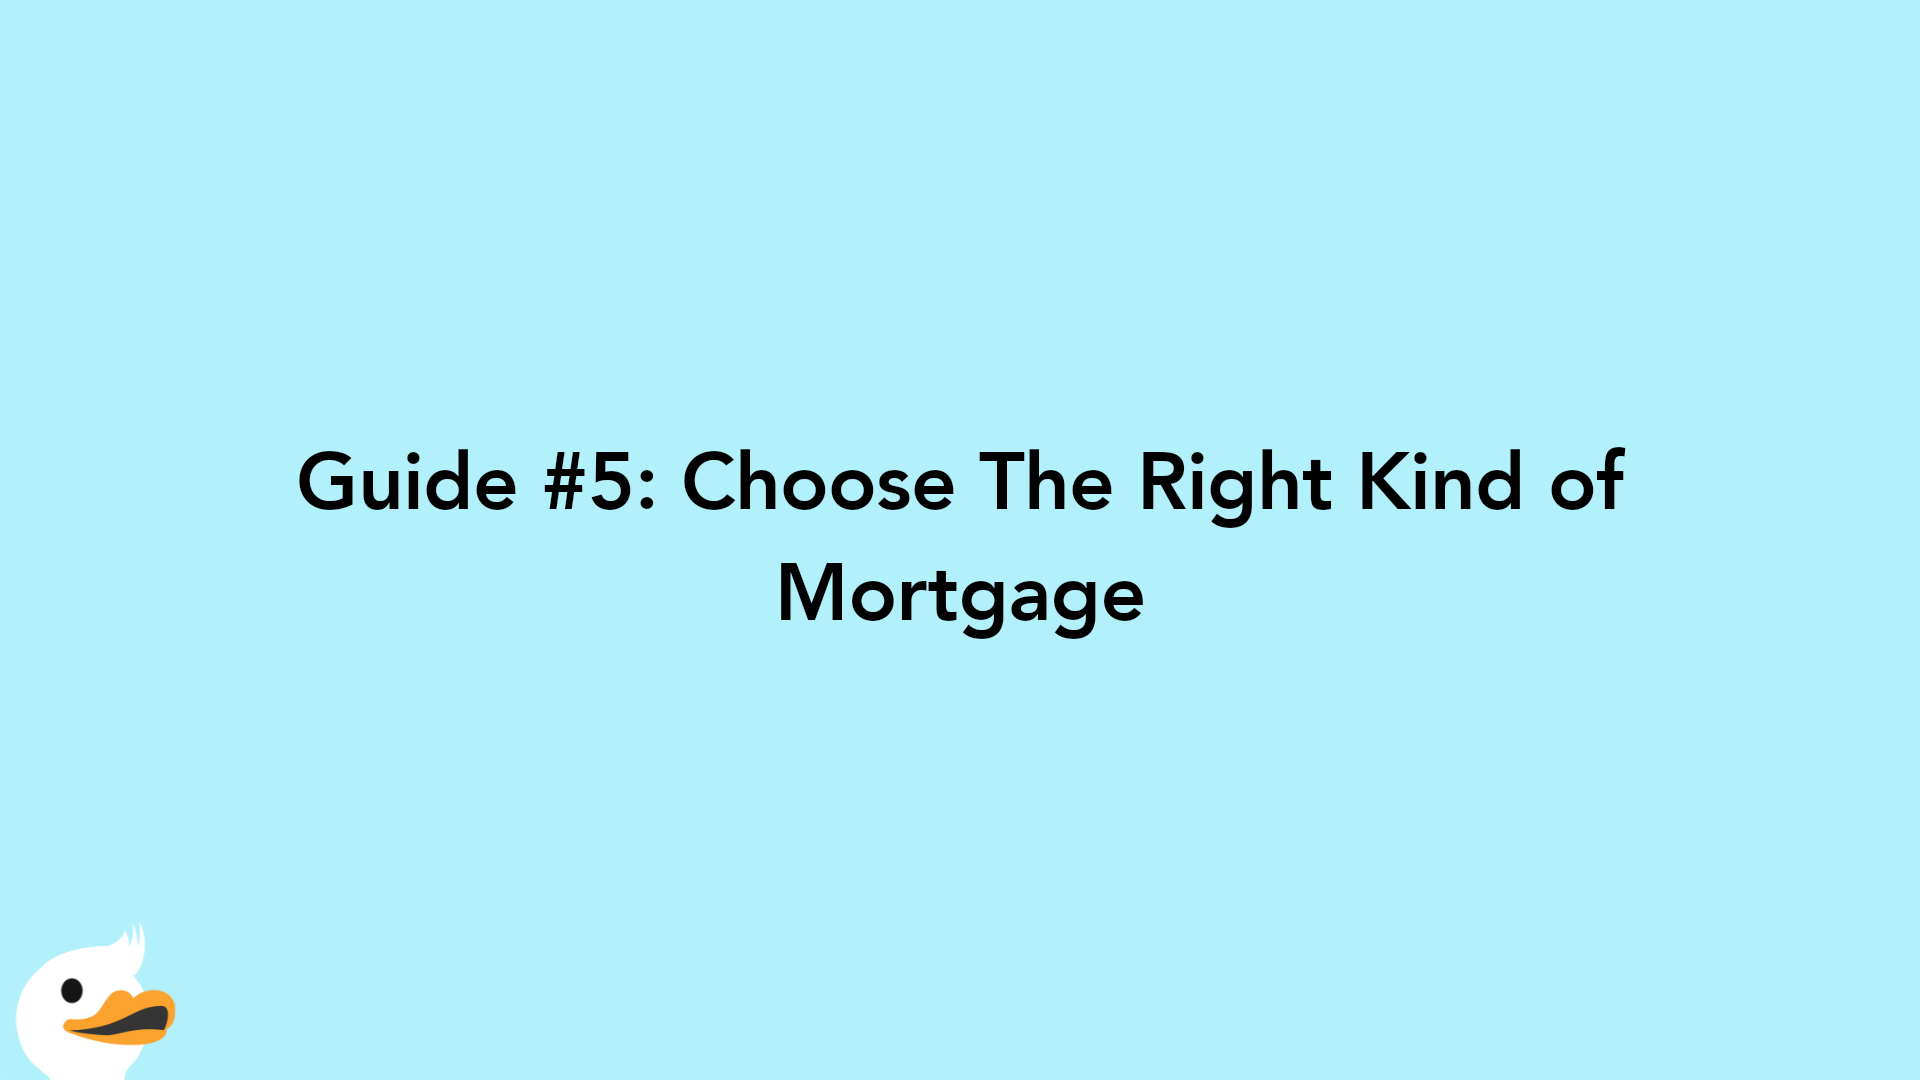 Guide #5: Choose The Right Kind of Mortgage